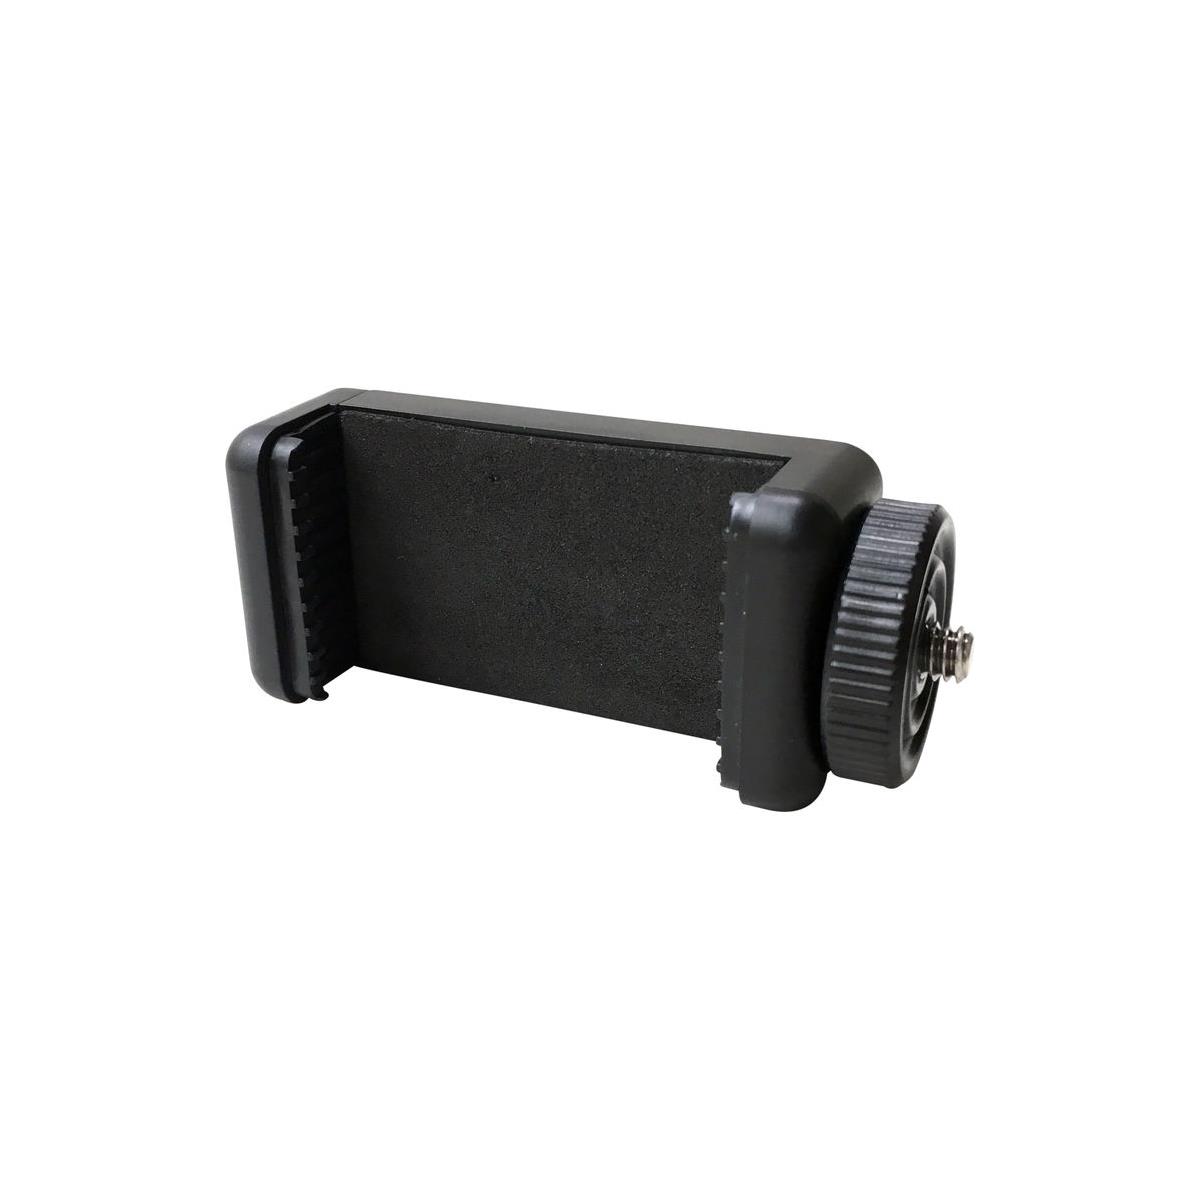 Litra Torch Smart Phone Mount